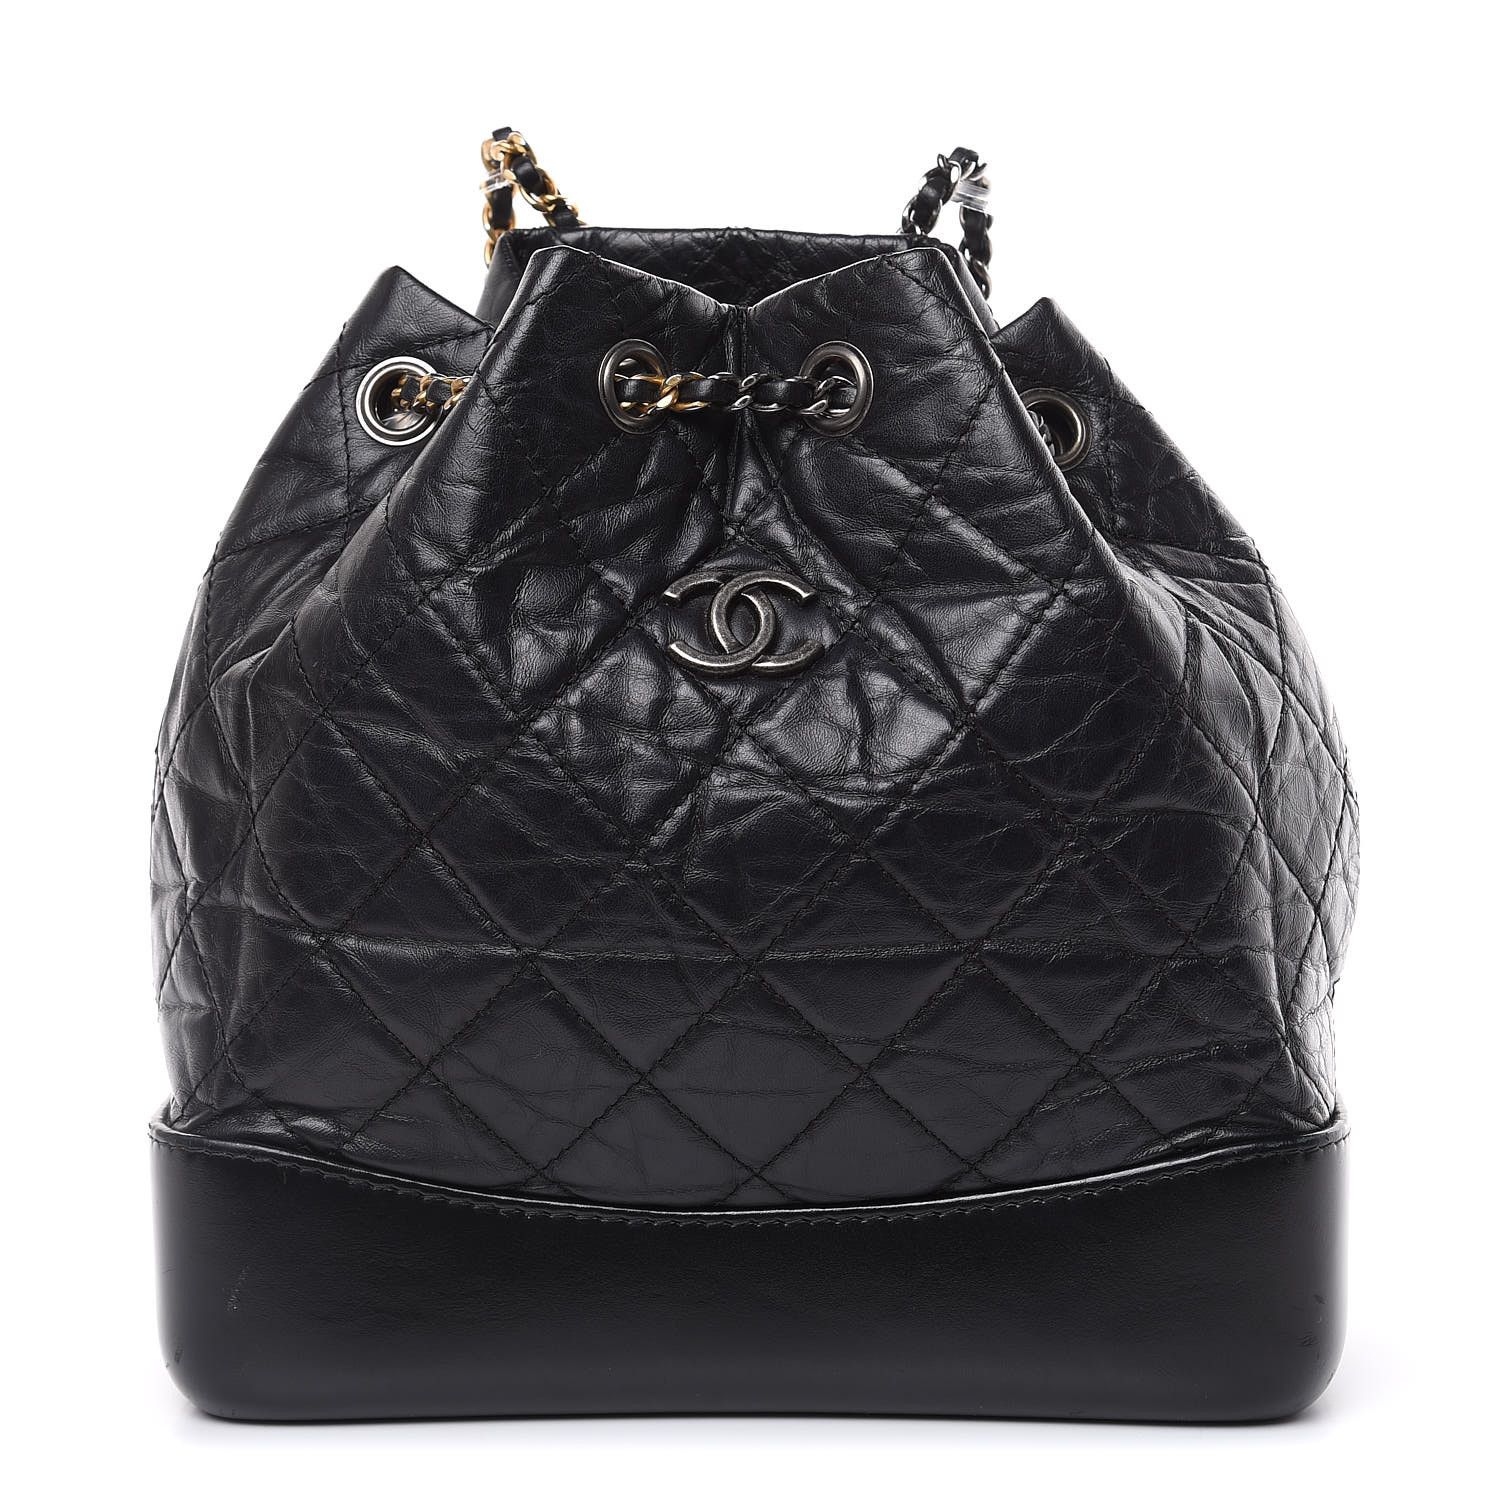 CHANEL Aged Calfskin Quilted Small Gabrielle Backpack Black | Fashionphile